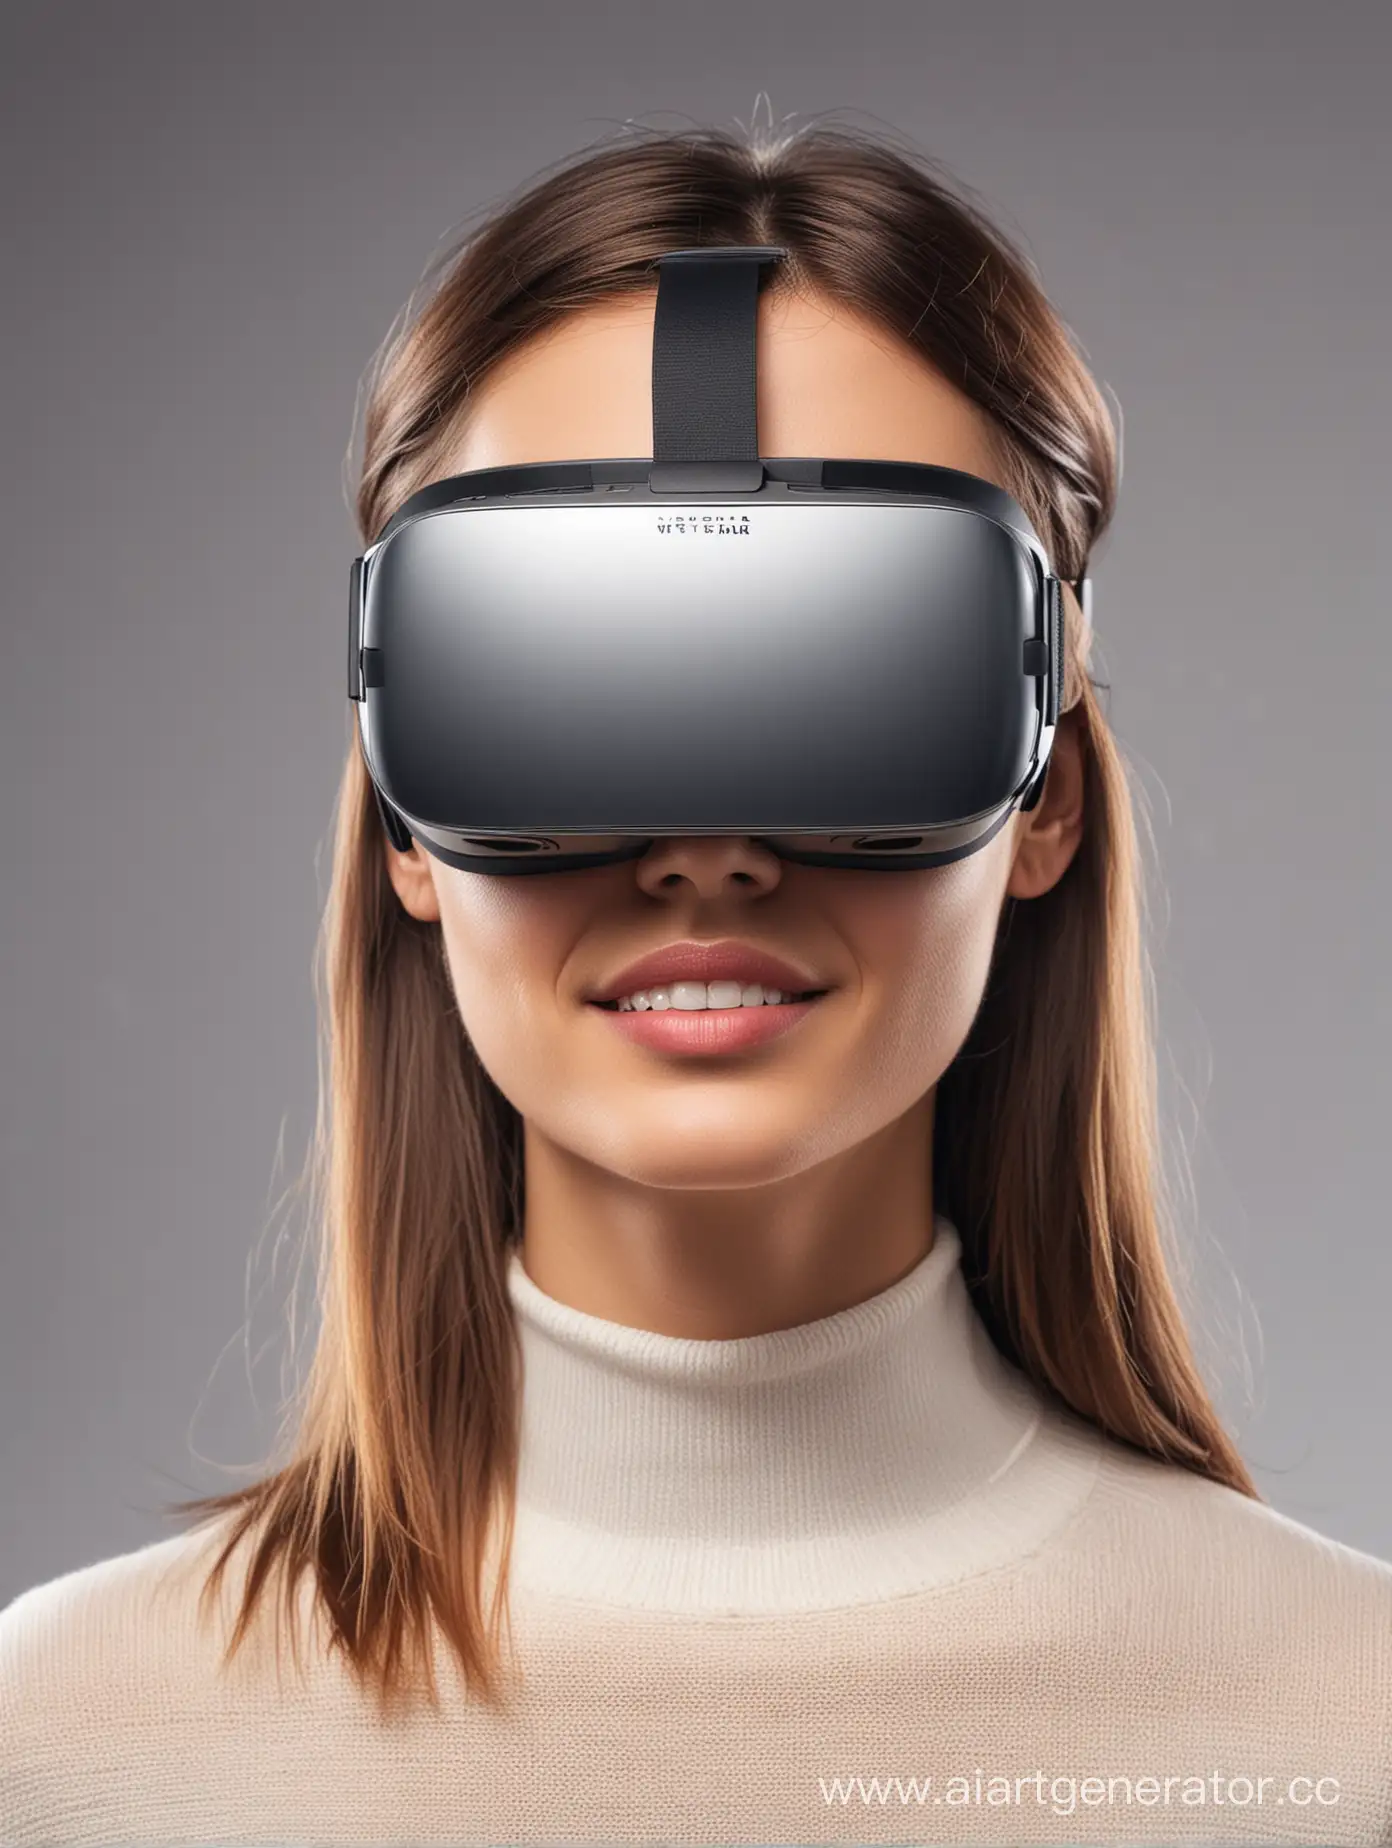 Immersive-Virtual-Reality-Shopping-Experience-with-Glasses